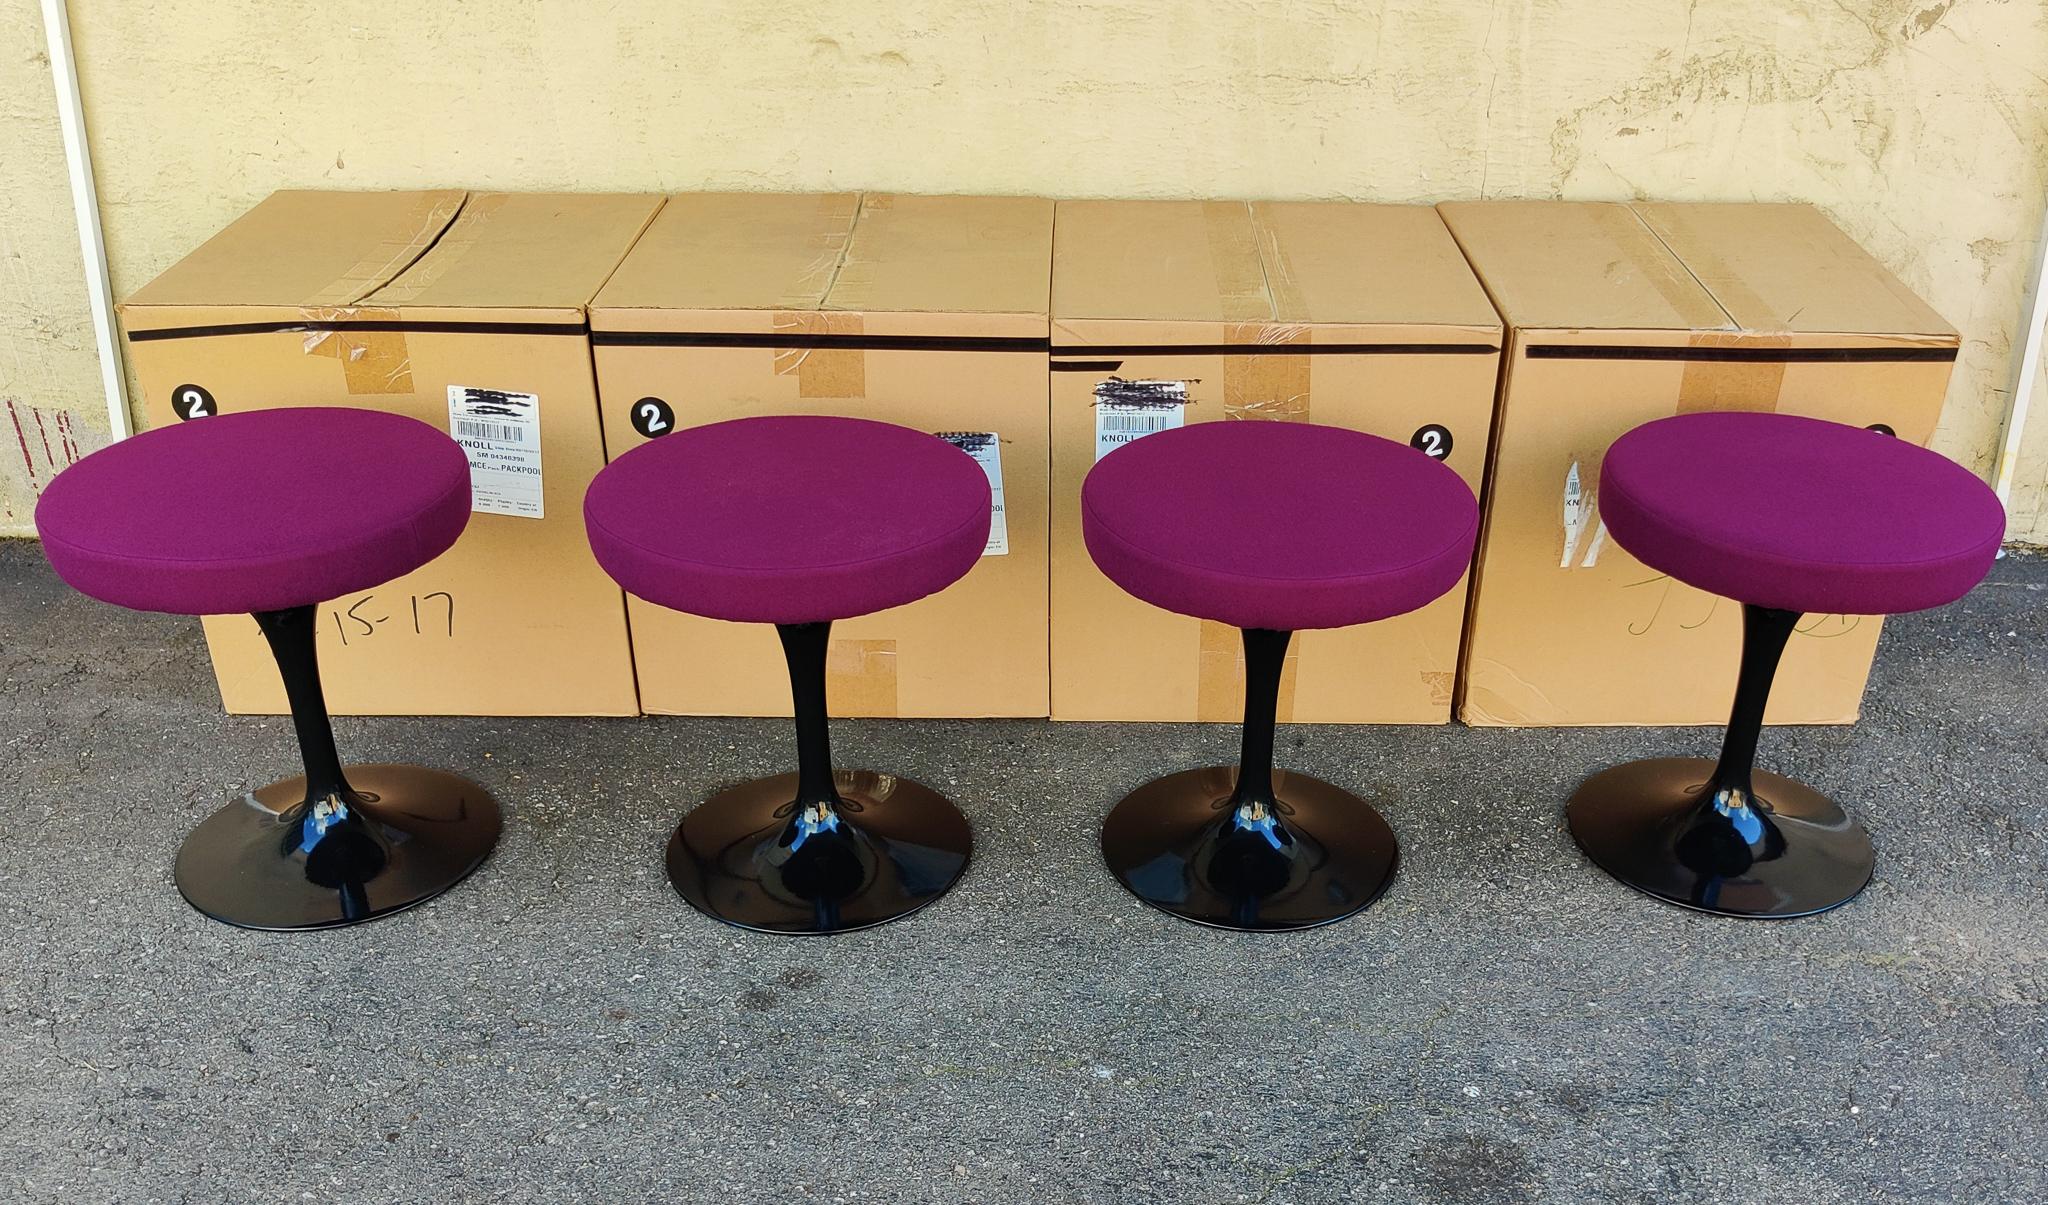 New in the box, one (1) Eero Saarinen - KnollStudio swivel-seat Tulip stool. Hourglass form in purple upholstered seat and black plastic coated aluminum base.  Each stool is new in the box, never used. Excellent condition. Complete with original